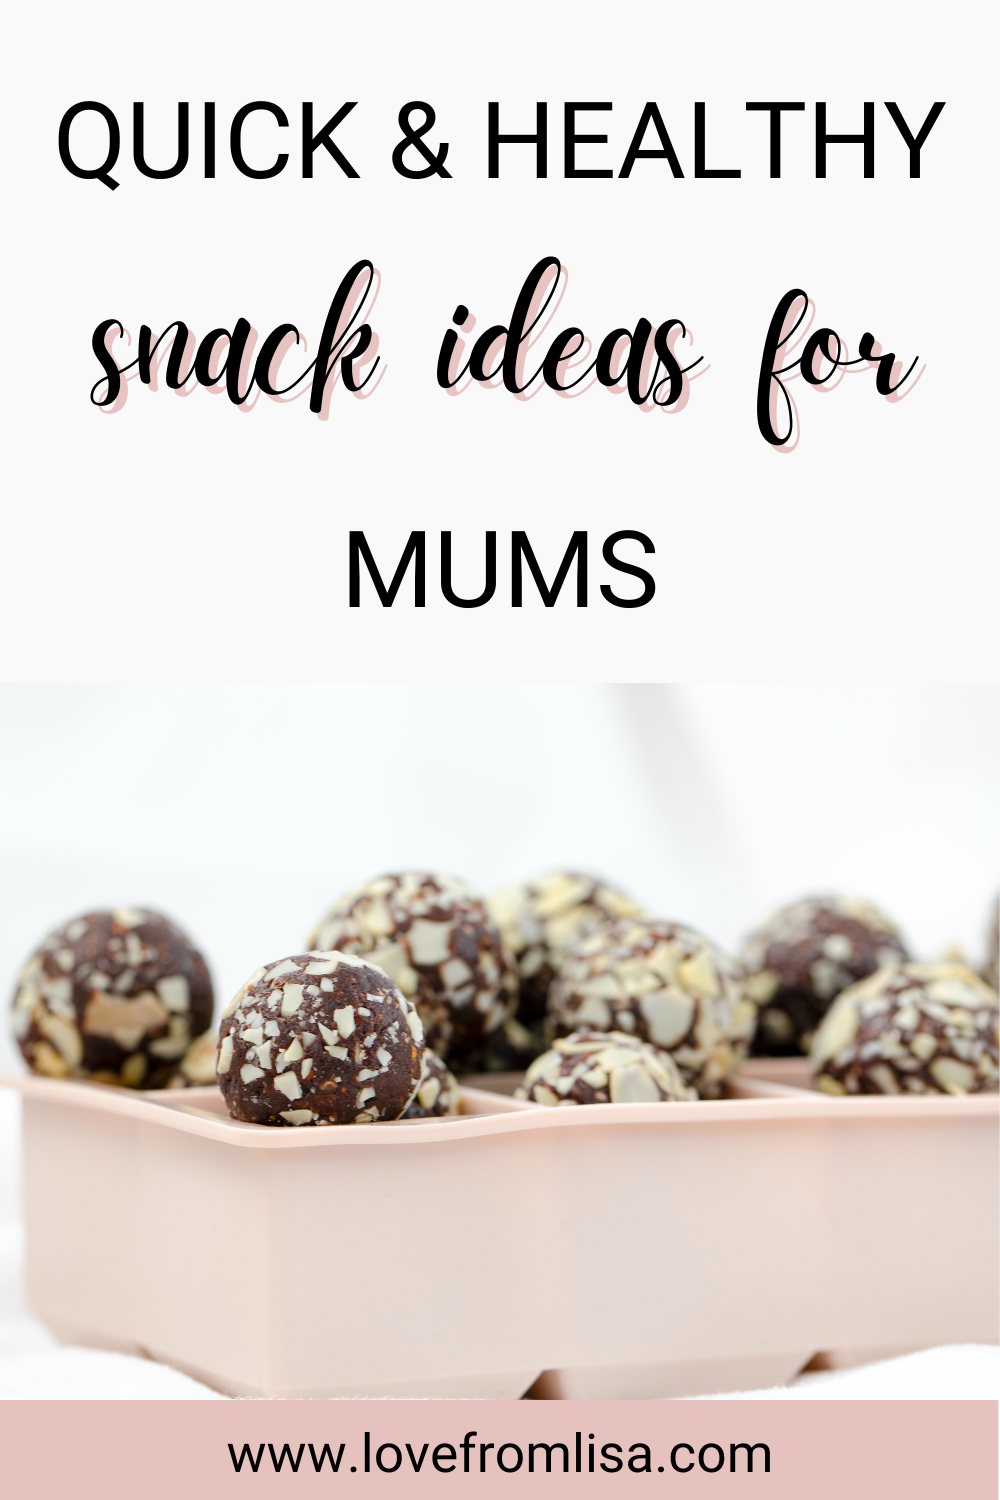 Quick and healthy snack ideas for mums, including savoury and sweet snack ideas that are easy to make, require little to no prep, and are perfect for on the go.